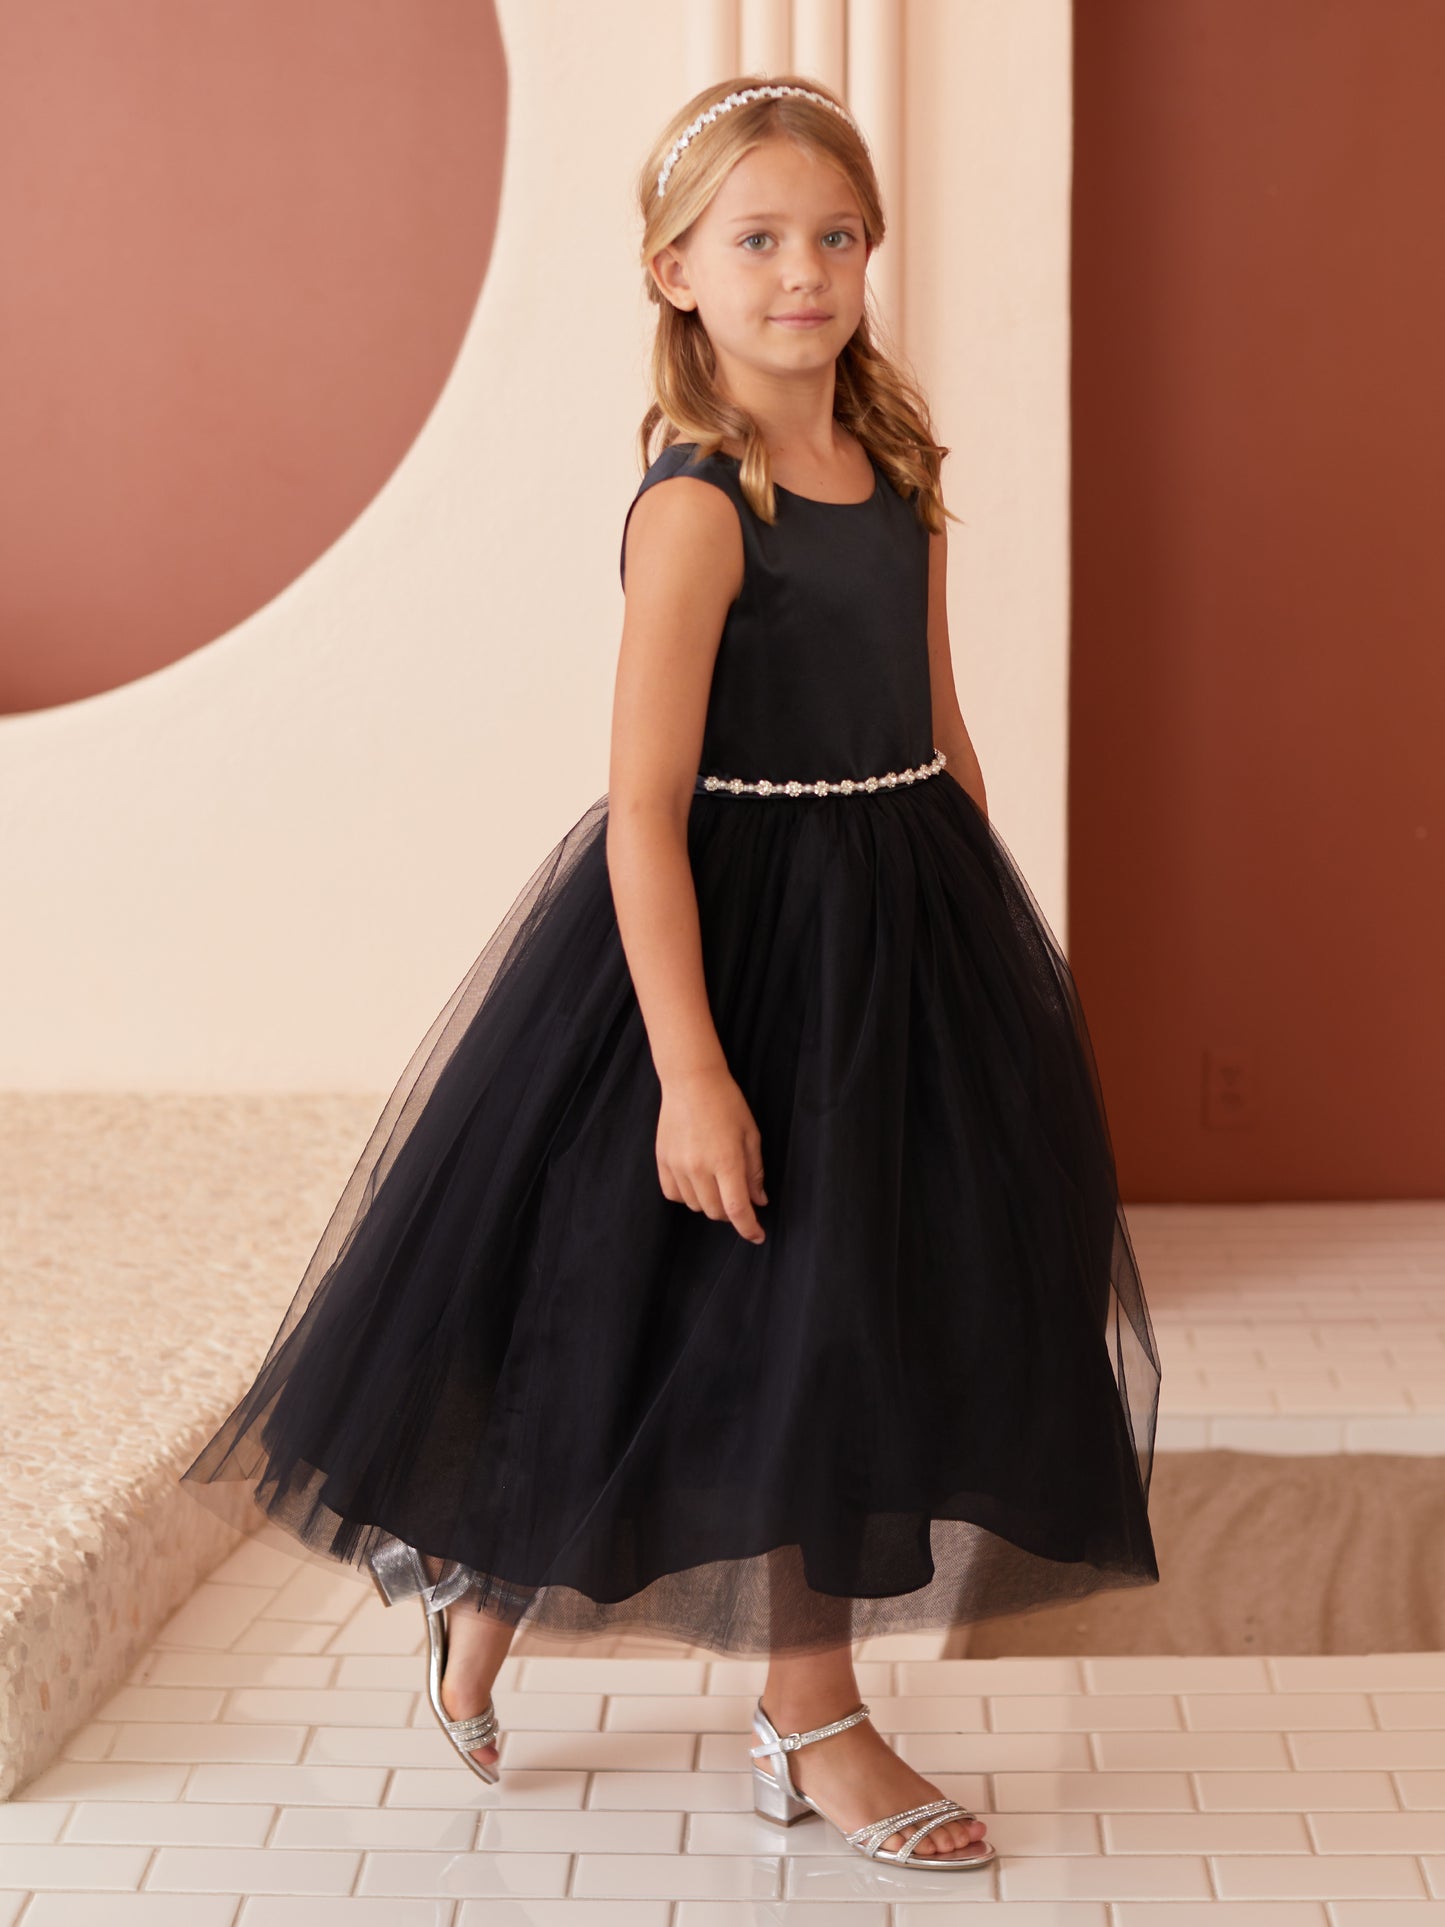 Satin Bodice with Tulle Flowers Girl Dress by TIPTOP KIDS - AS5872